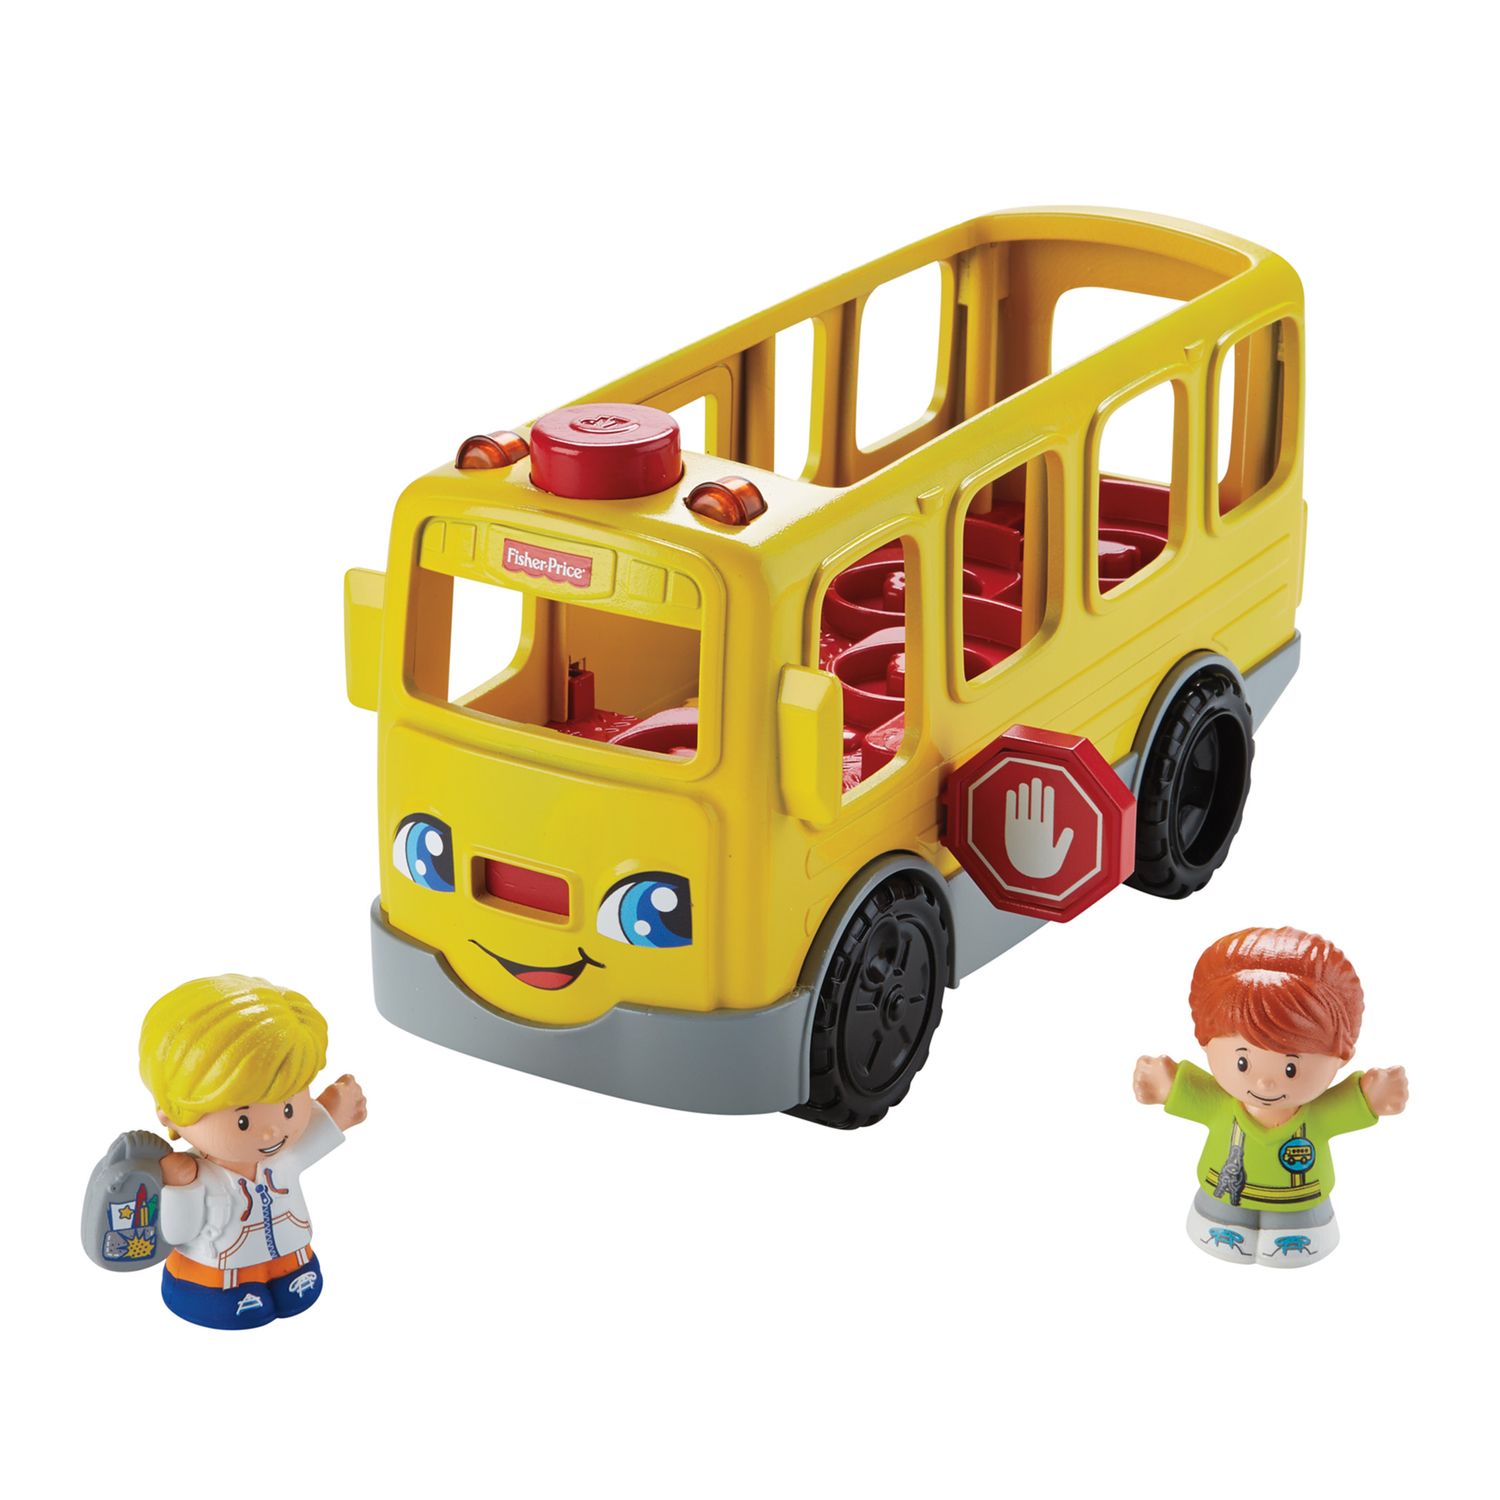 little people toy cars